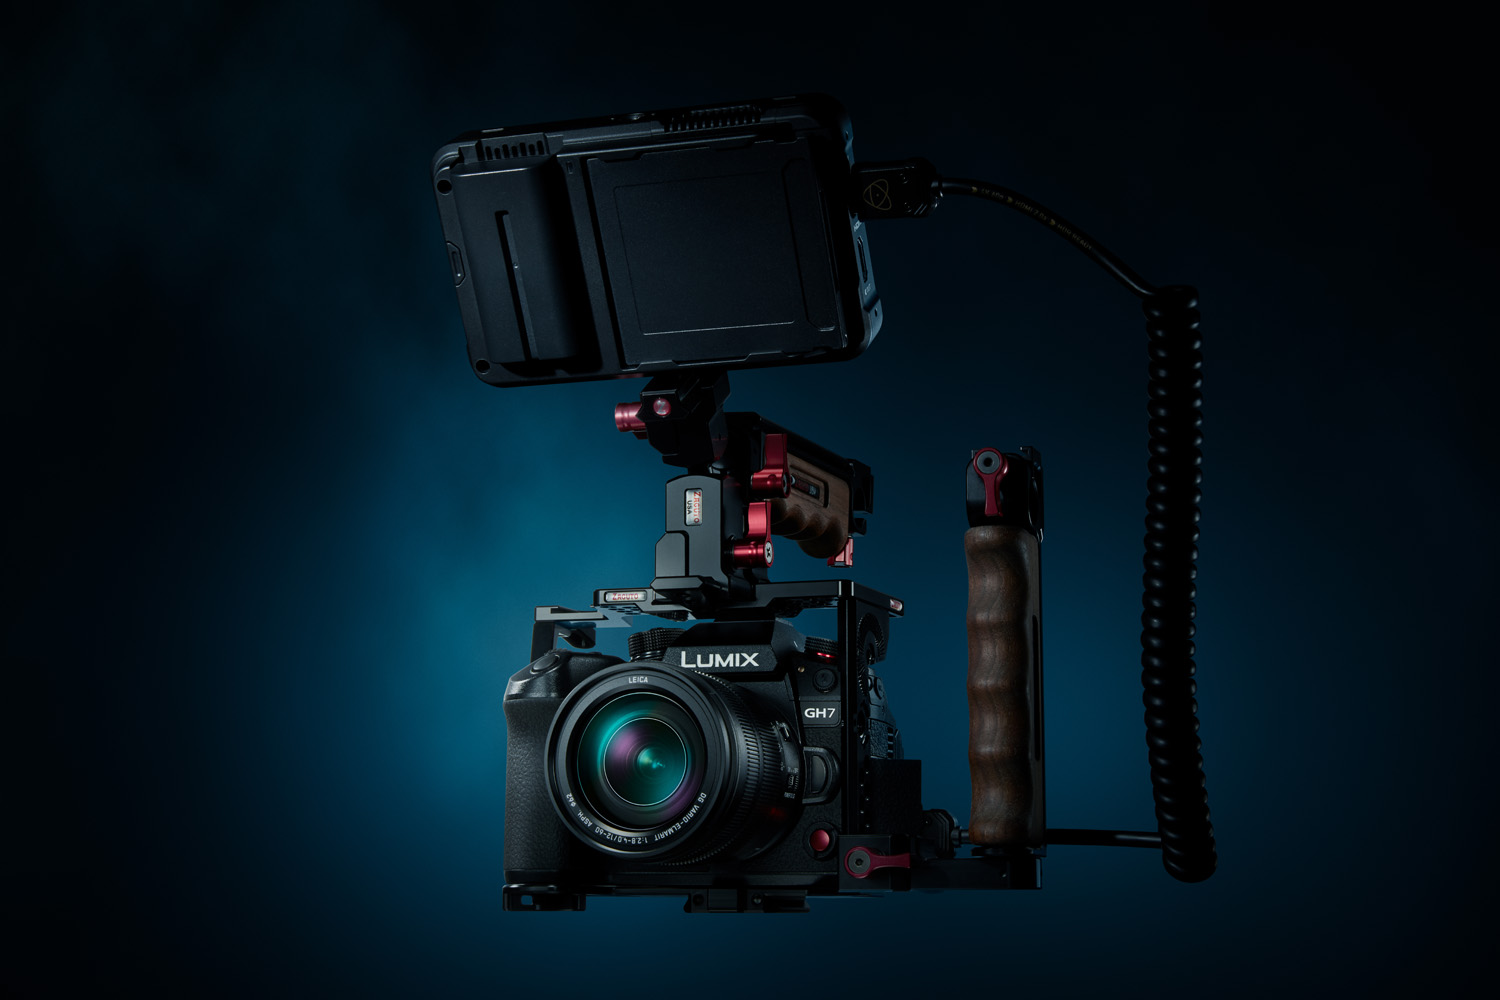 Product photo of Panasonic Lumix GH7 camera with full rig attached.